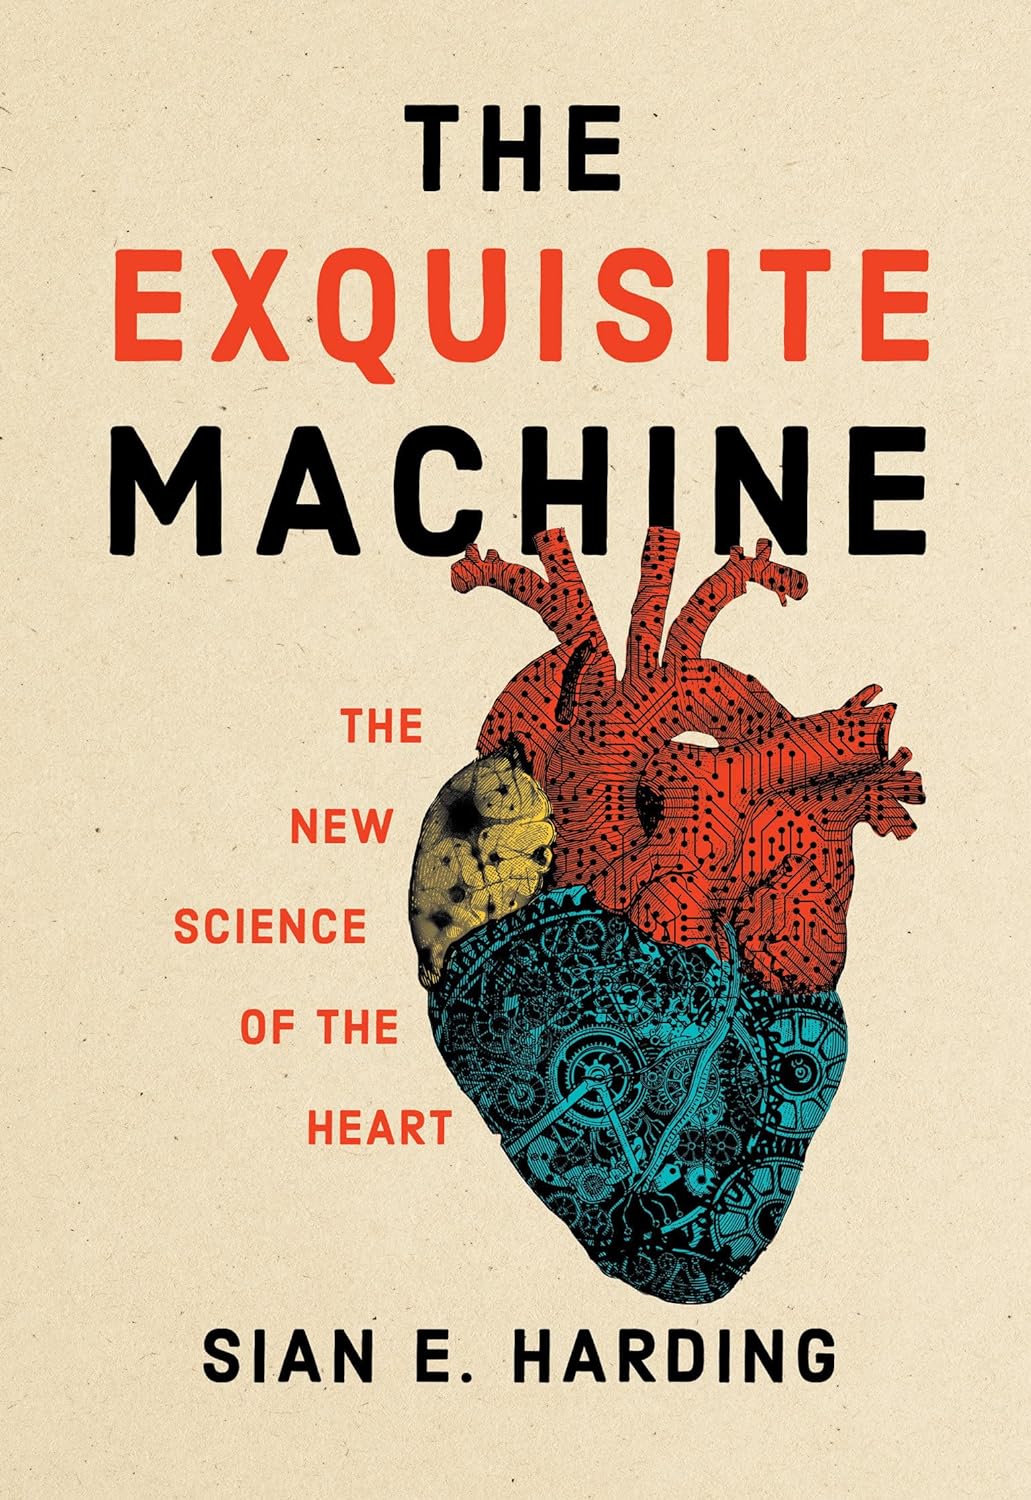 The Exquisite Machine: The New Science of the Heart by Sian E. Harding